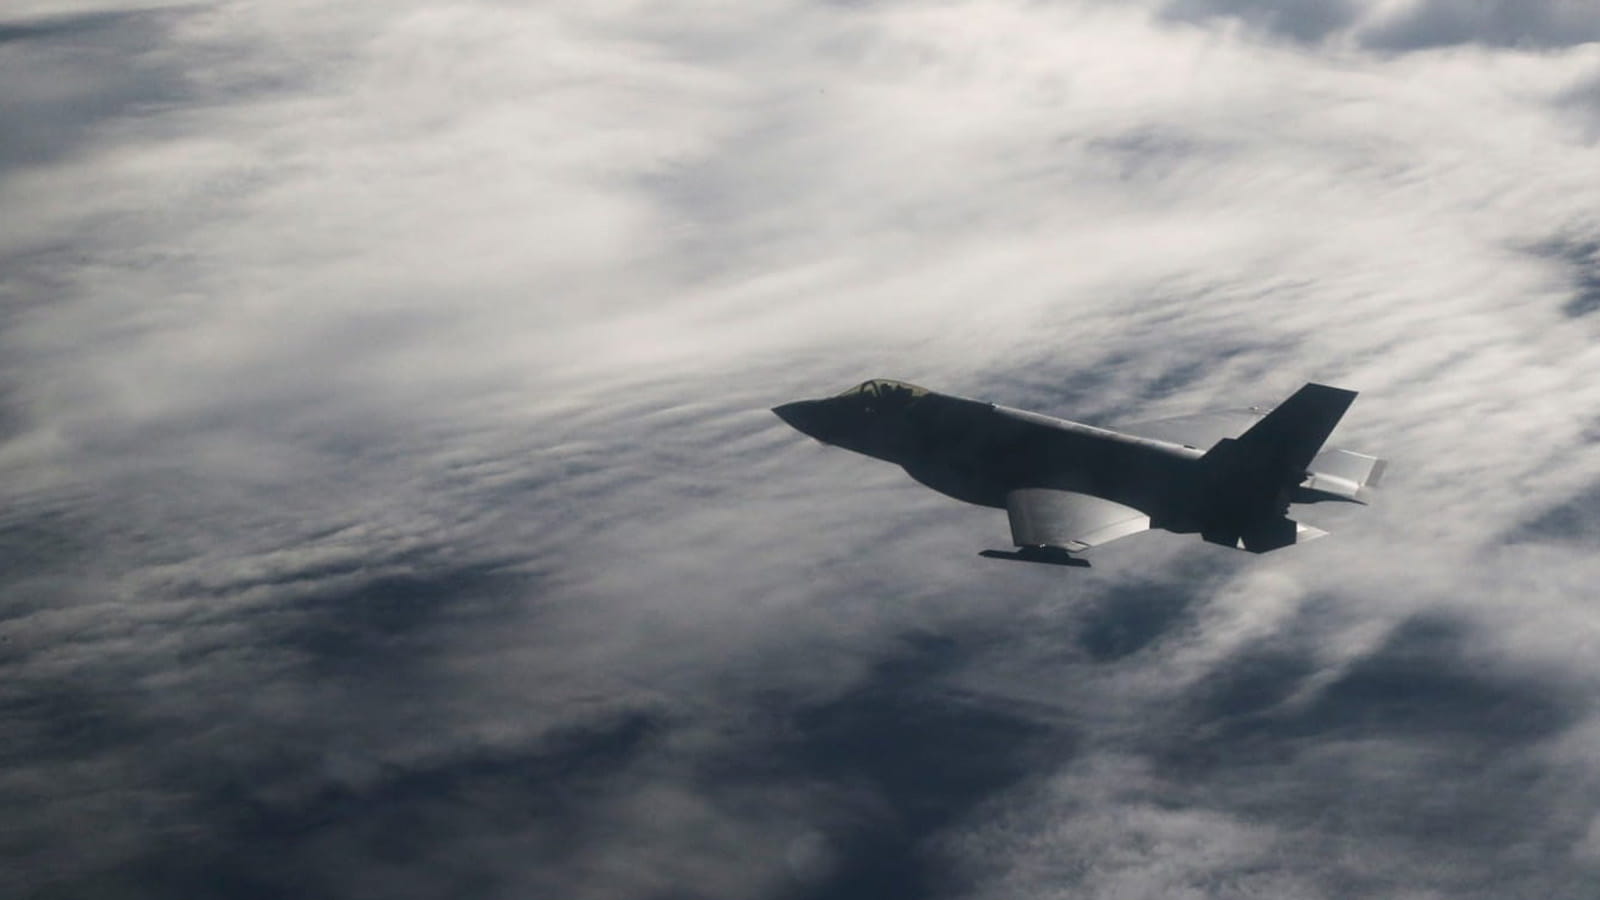 A fighter jet flying across a cloudy sky